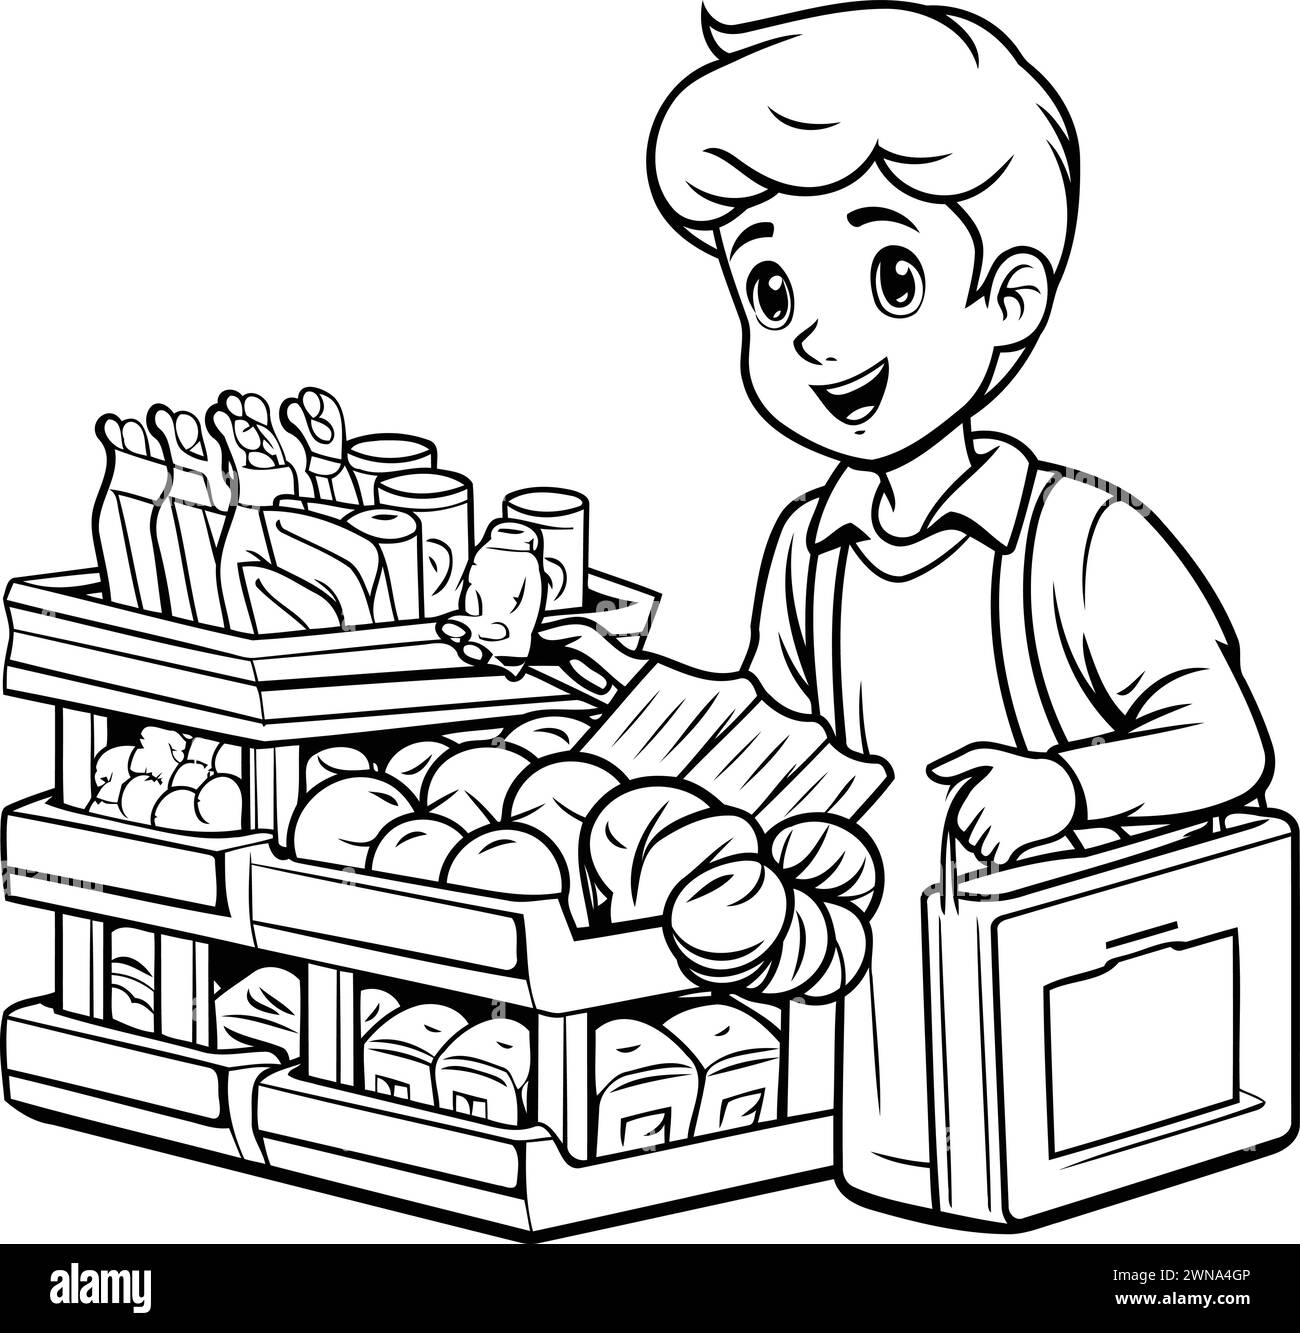 Black and White Cartoon Illustration of Boy Selling Groceries or Groceries for Coloring Book Stock Vector